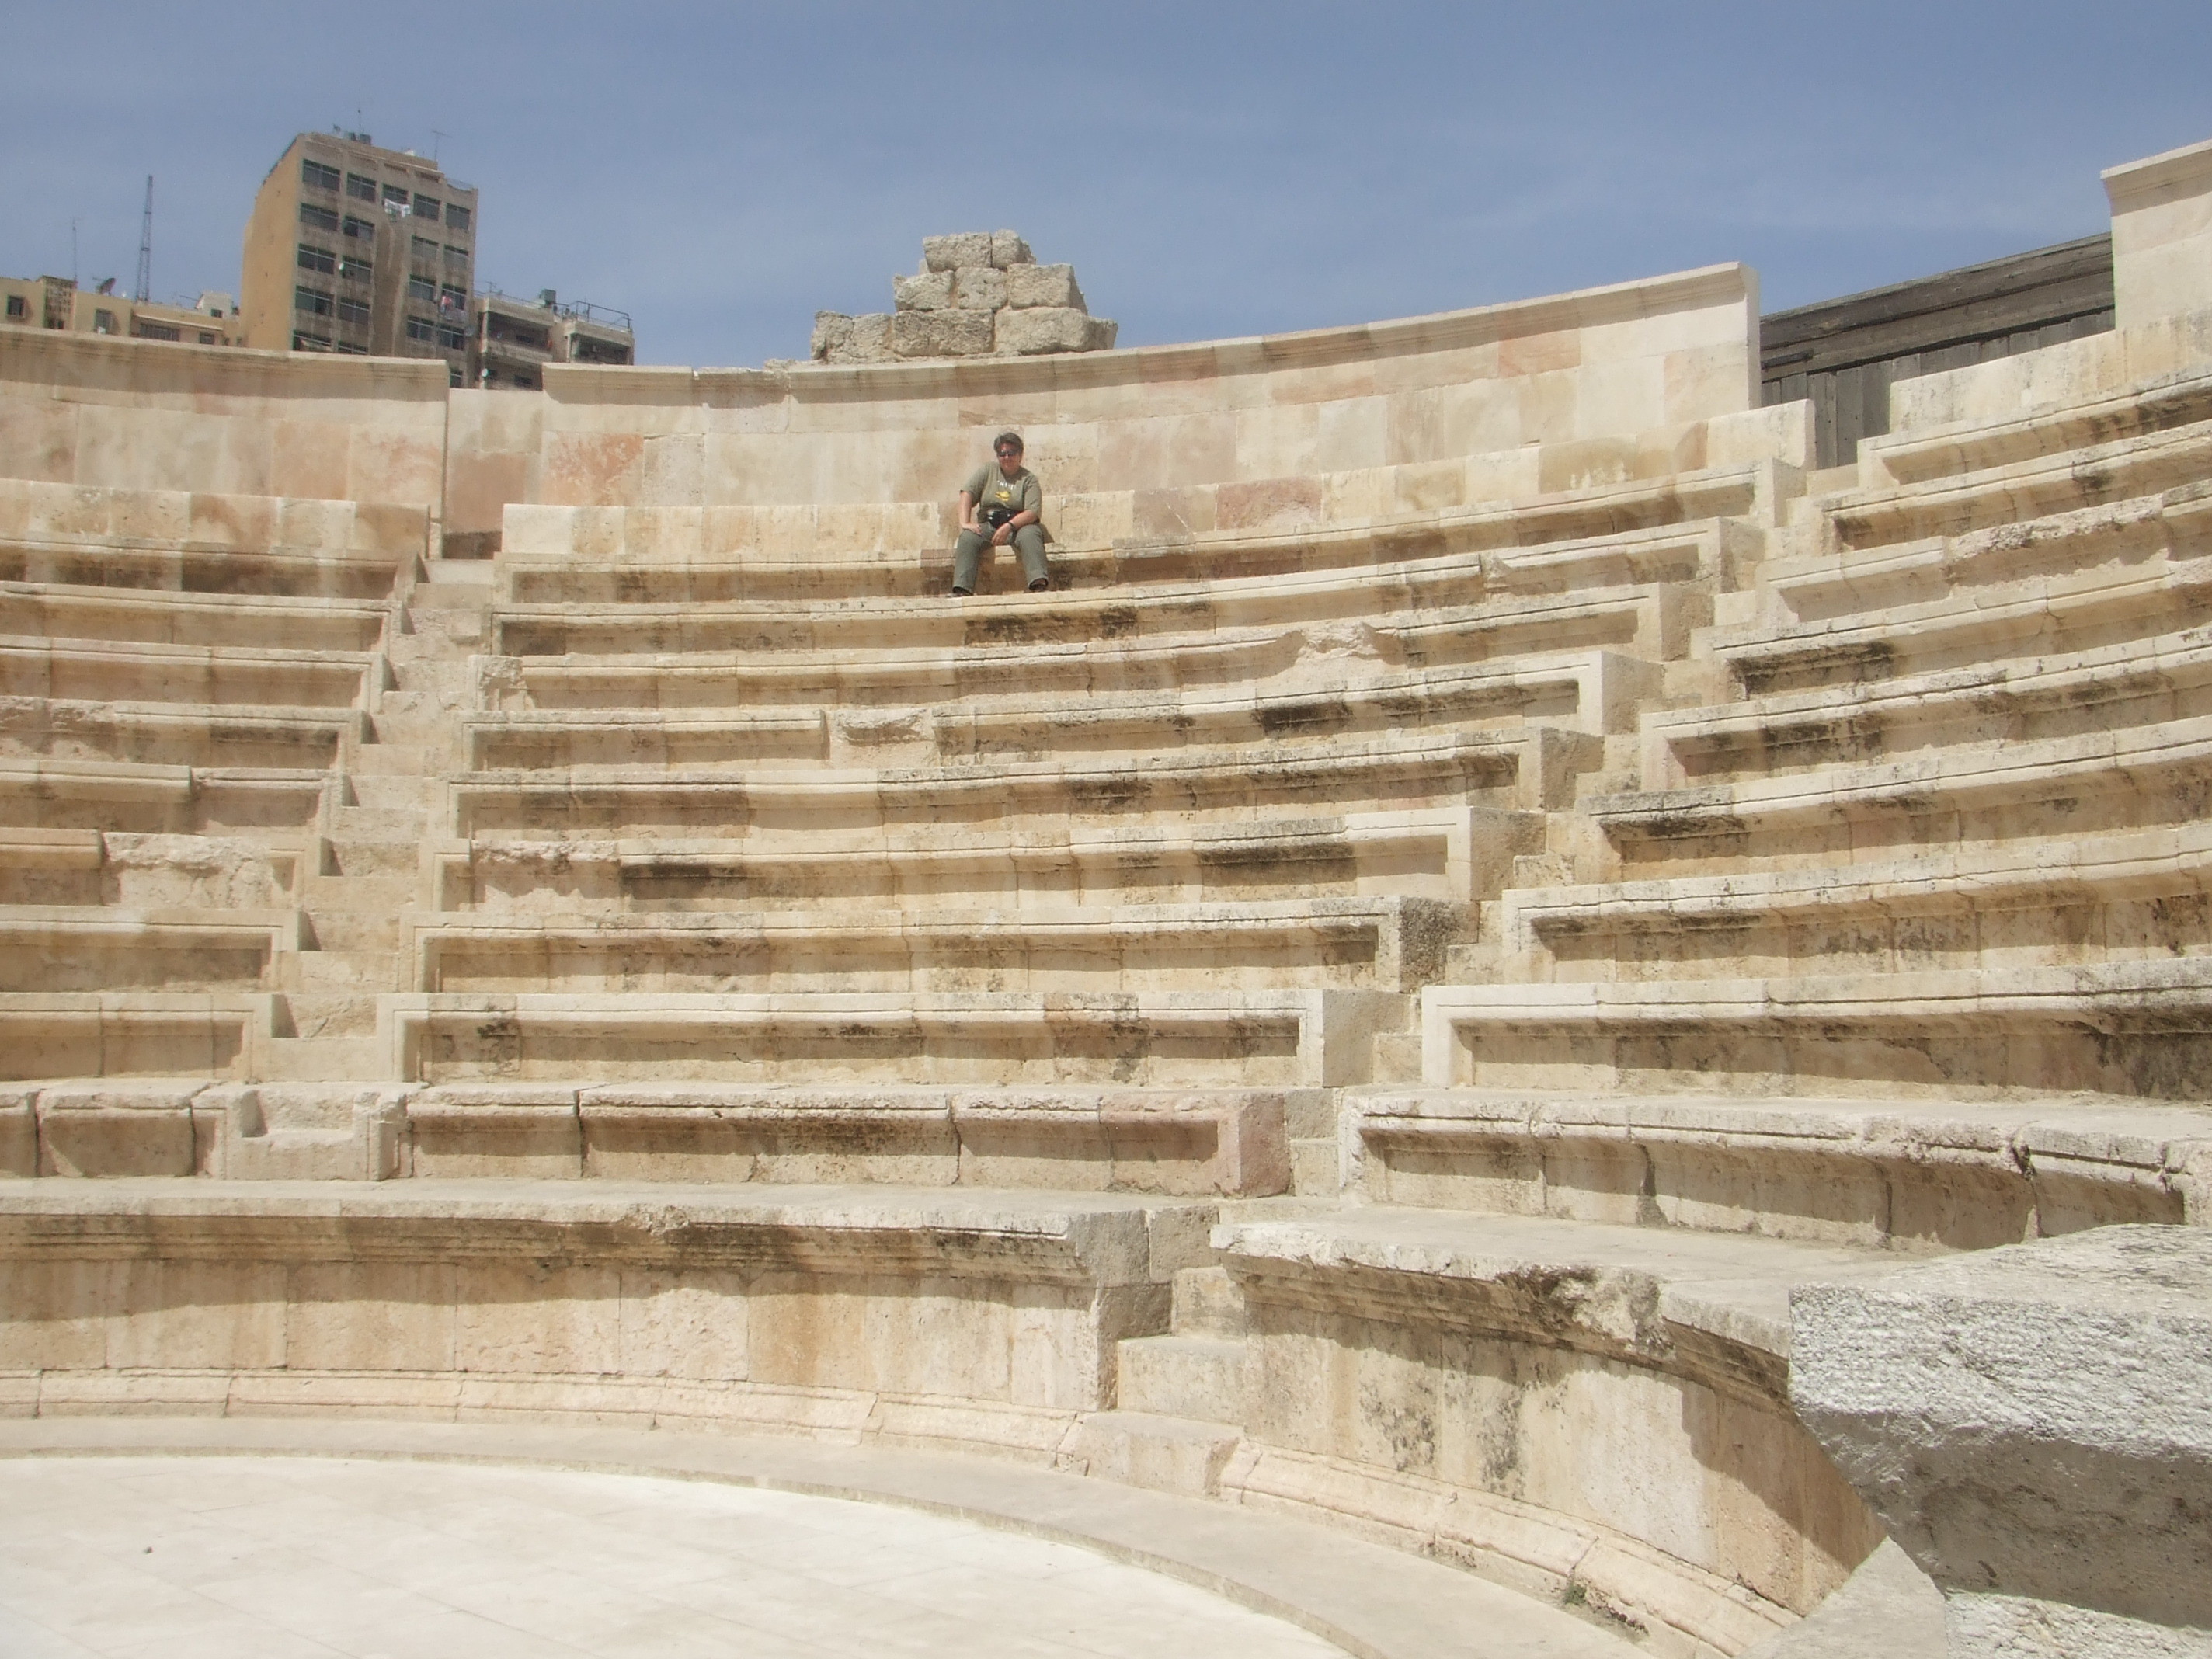 Odeon, Amman The Odeon sits in Hashemite Square adjacent to the much larger amphitheatre and accessible with the same ticket. Amman's city centre may have a modern feel today but is actually one of the oldest continuously inhabited cities in the World, with evidence of its classical past (as the ancient city of Philadelphia) still visible in certain areas. The most important remaining monument of the city's classical past is the stunning Roman amphitheatre. The theatre was built the reign of Antonius Pius (138-161 AD) and could seat up to 6,000 people. Built into the hillside, it was oriented north to keep the fierce sun off the spectators.